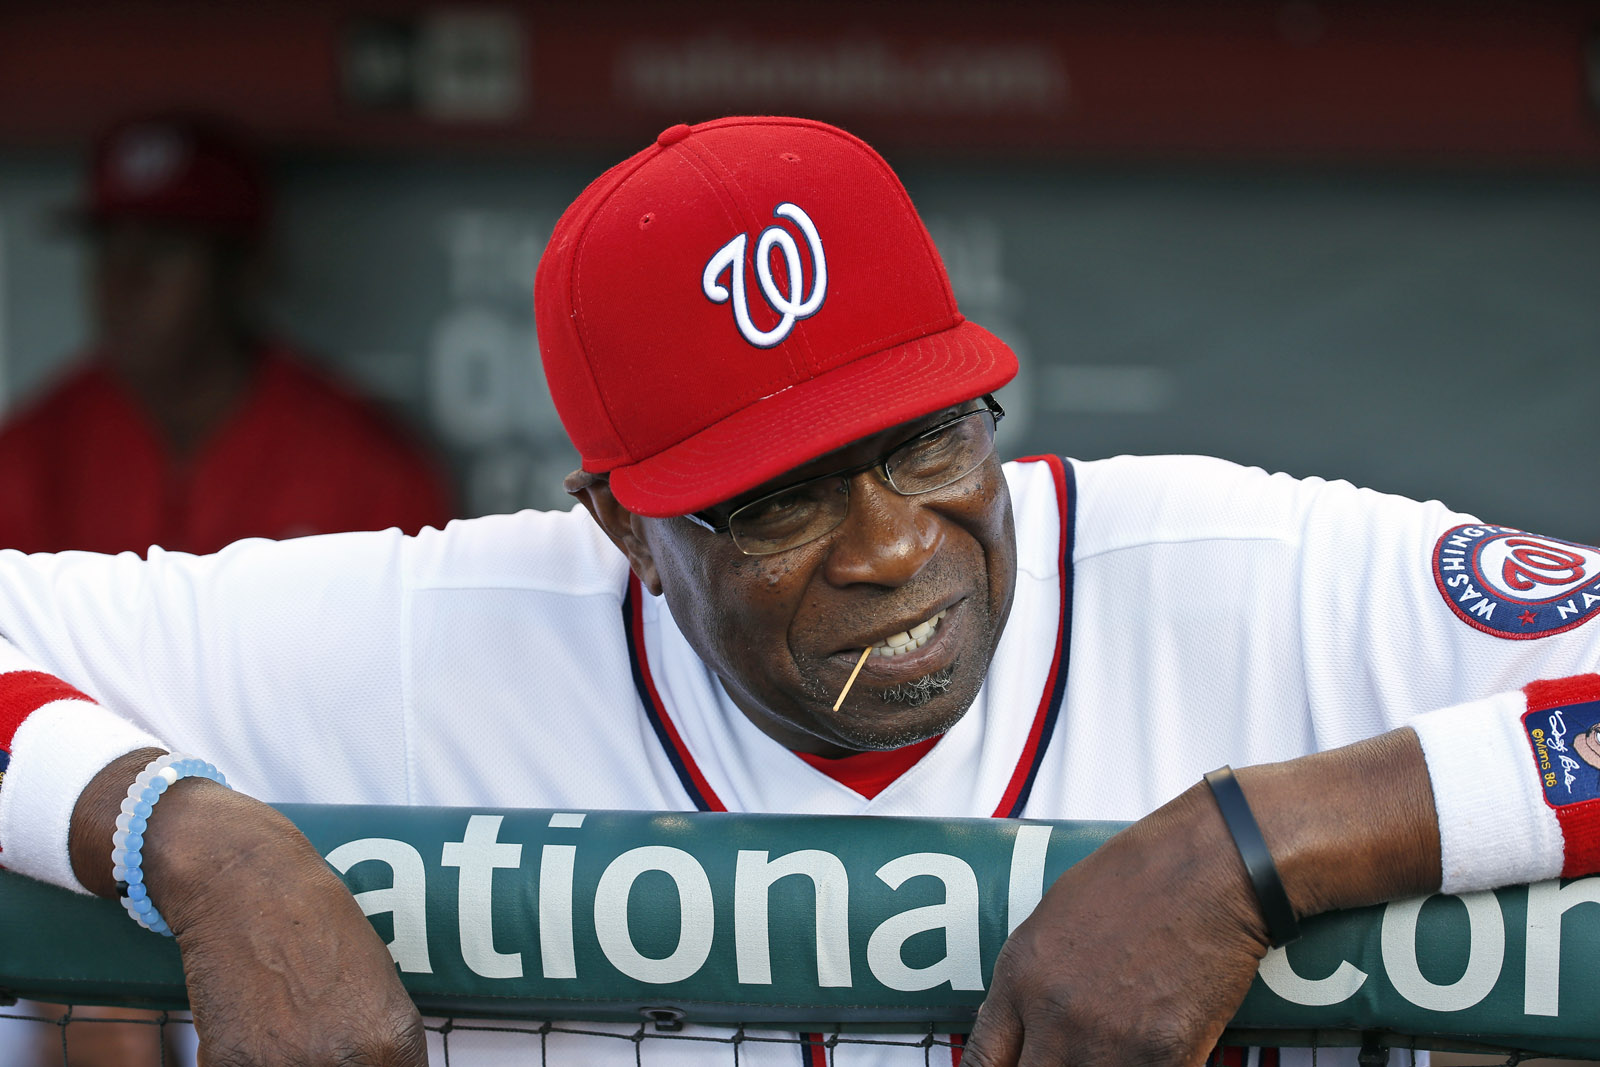 As DC considers chewing tobacco ban, Nats manager weighs in - WTOP